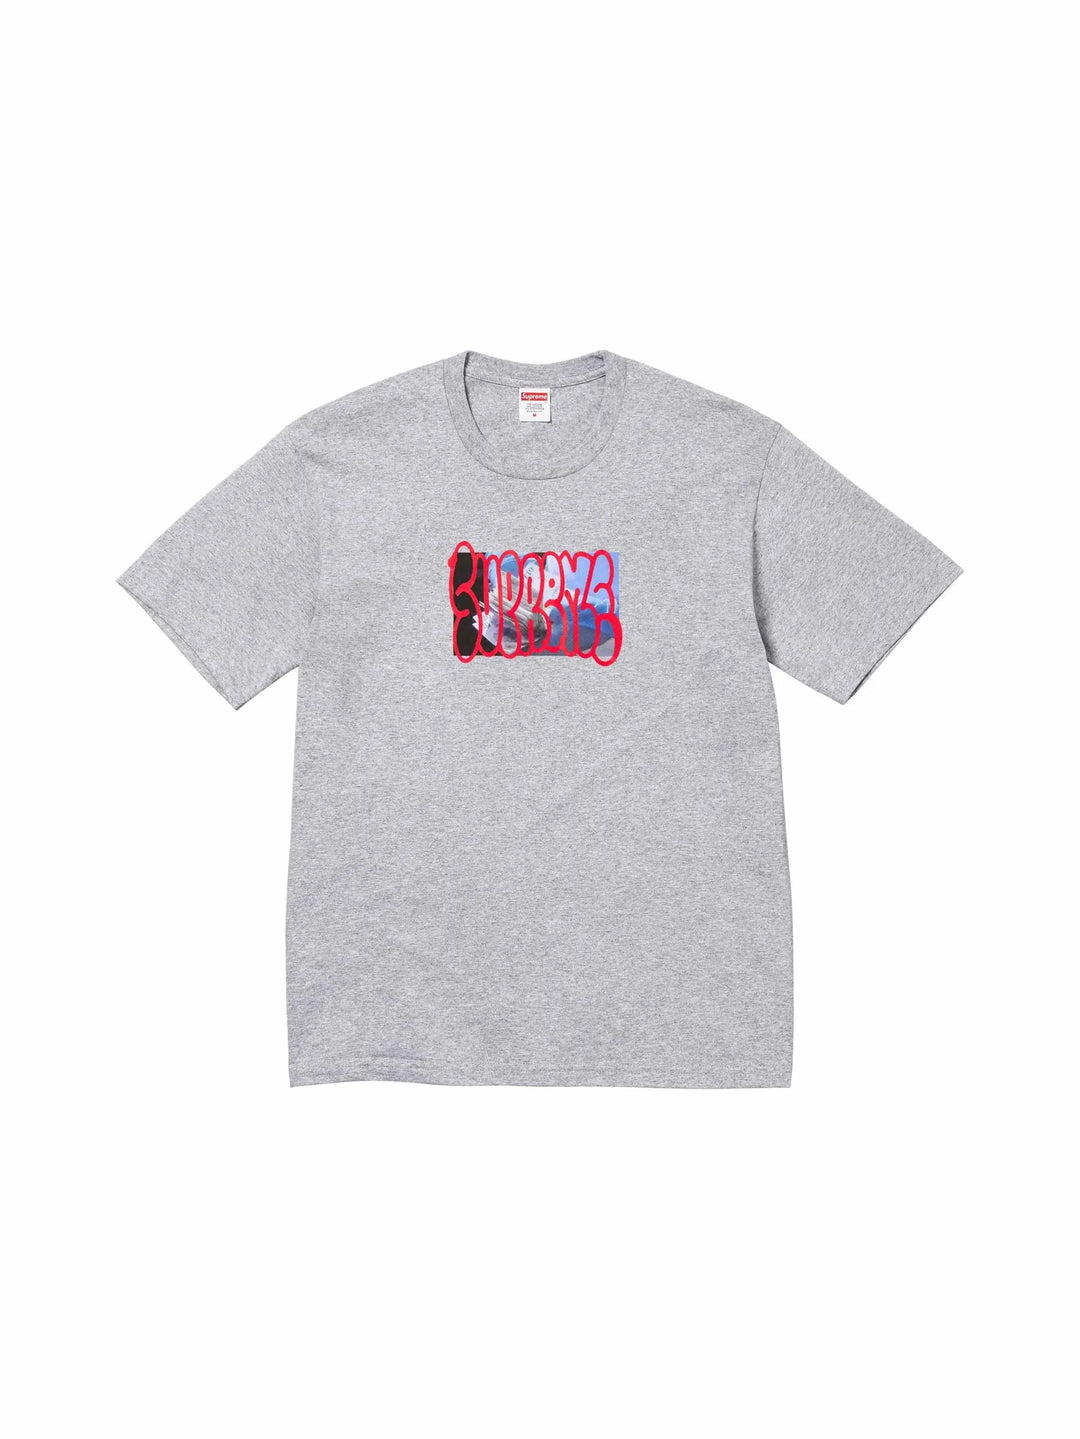 Supreme Payment Tee Heather Grey in Auckland, New Zealand - Shop name